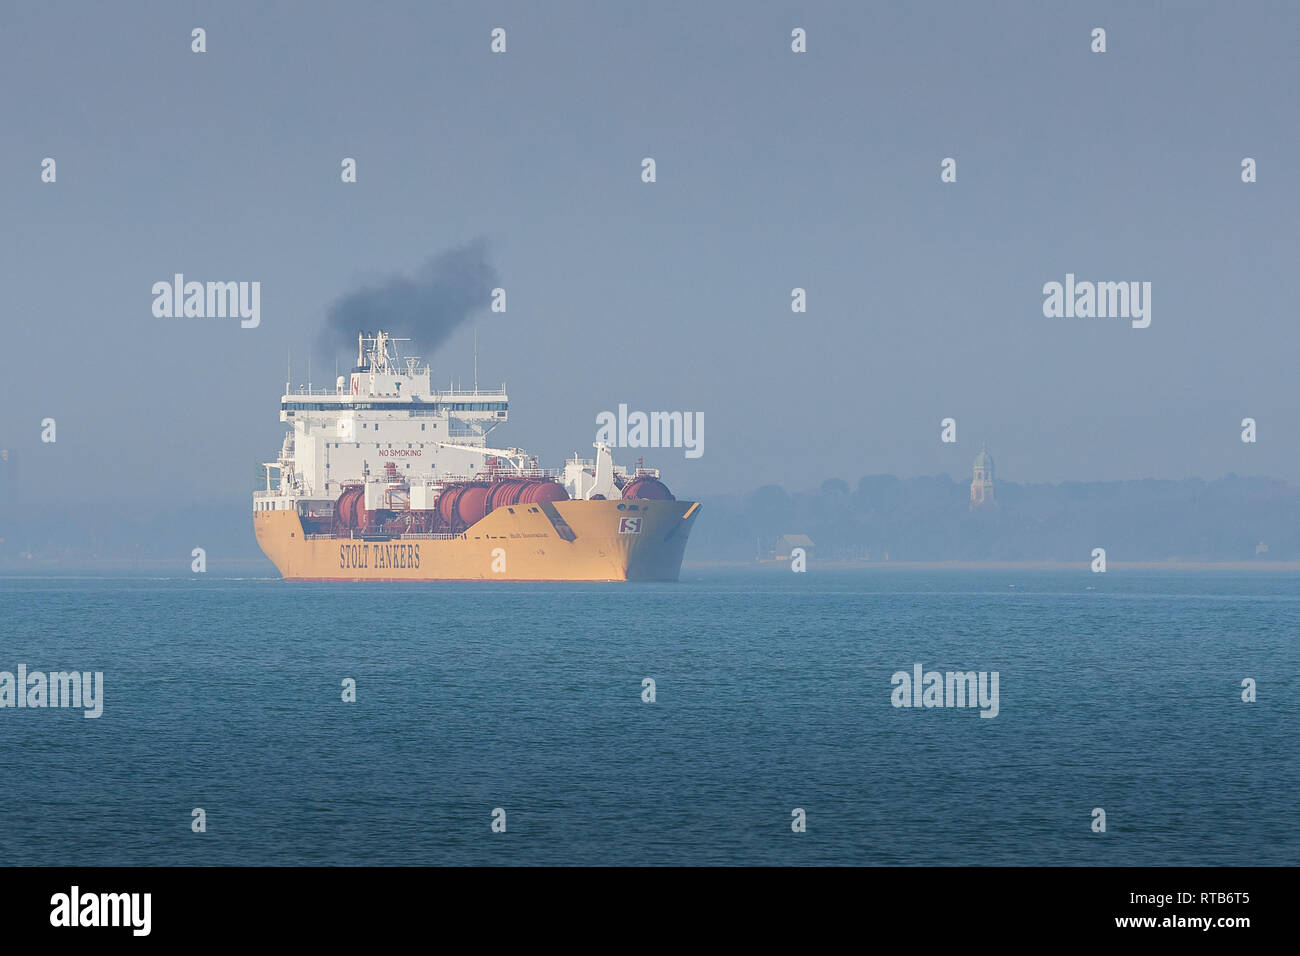 The Stolt Tankers, STOLT INNOVATION, Chemical/Oil Products Tanker, Departs the Fawley Oil Refinery, Southampton, UK, En Route For Houston, Texas, USA. Stock Photo